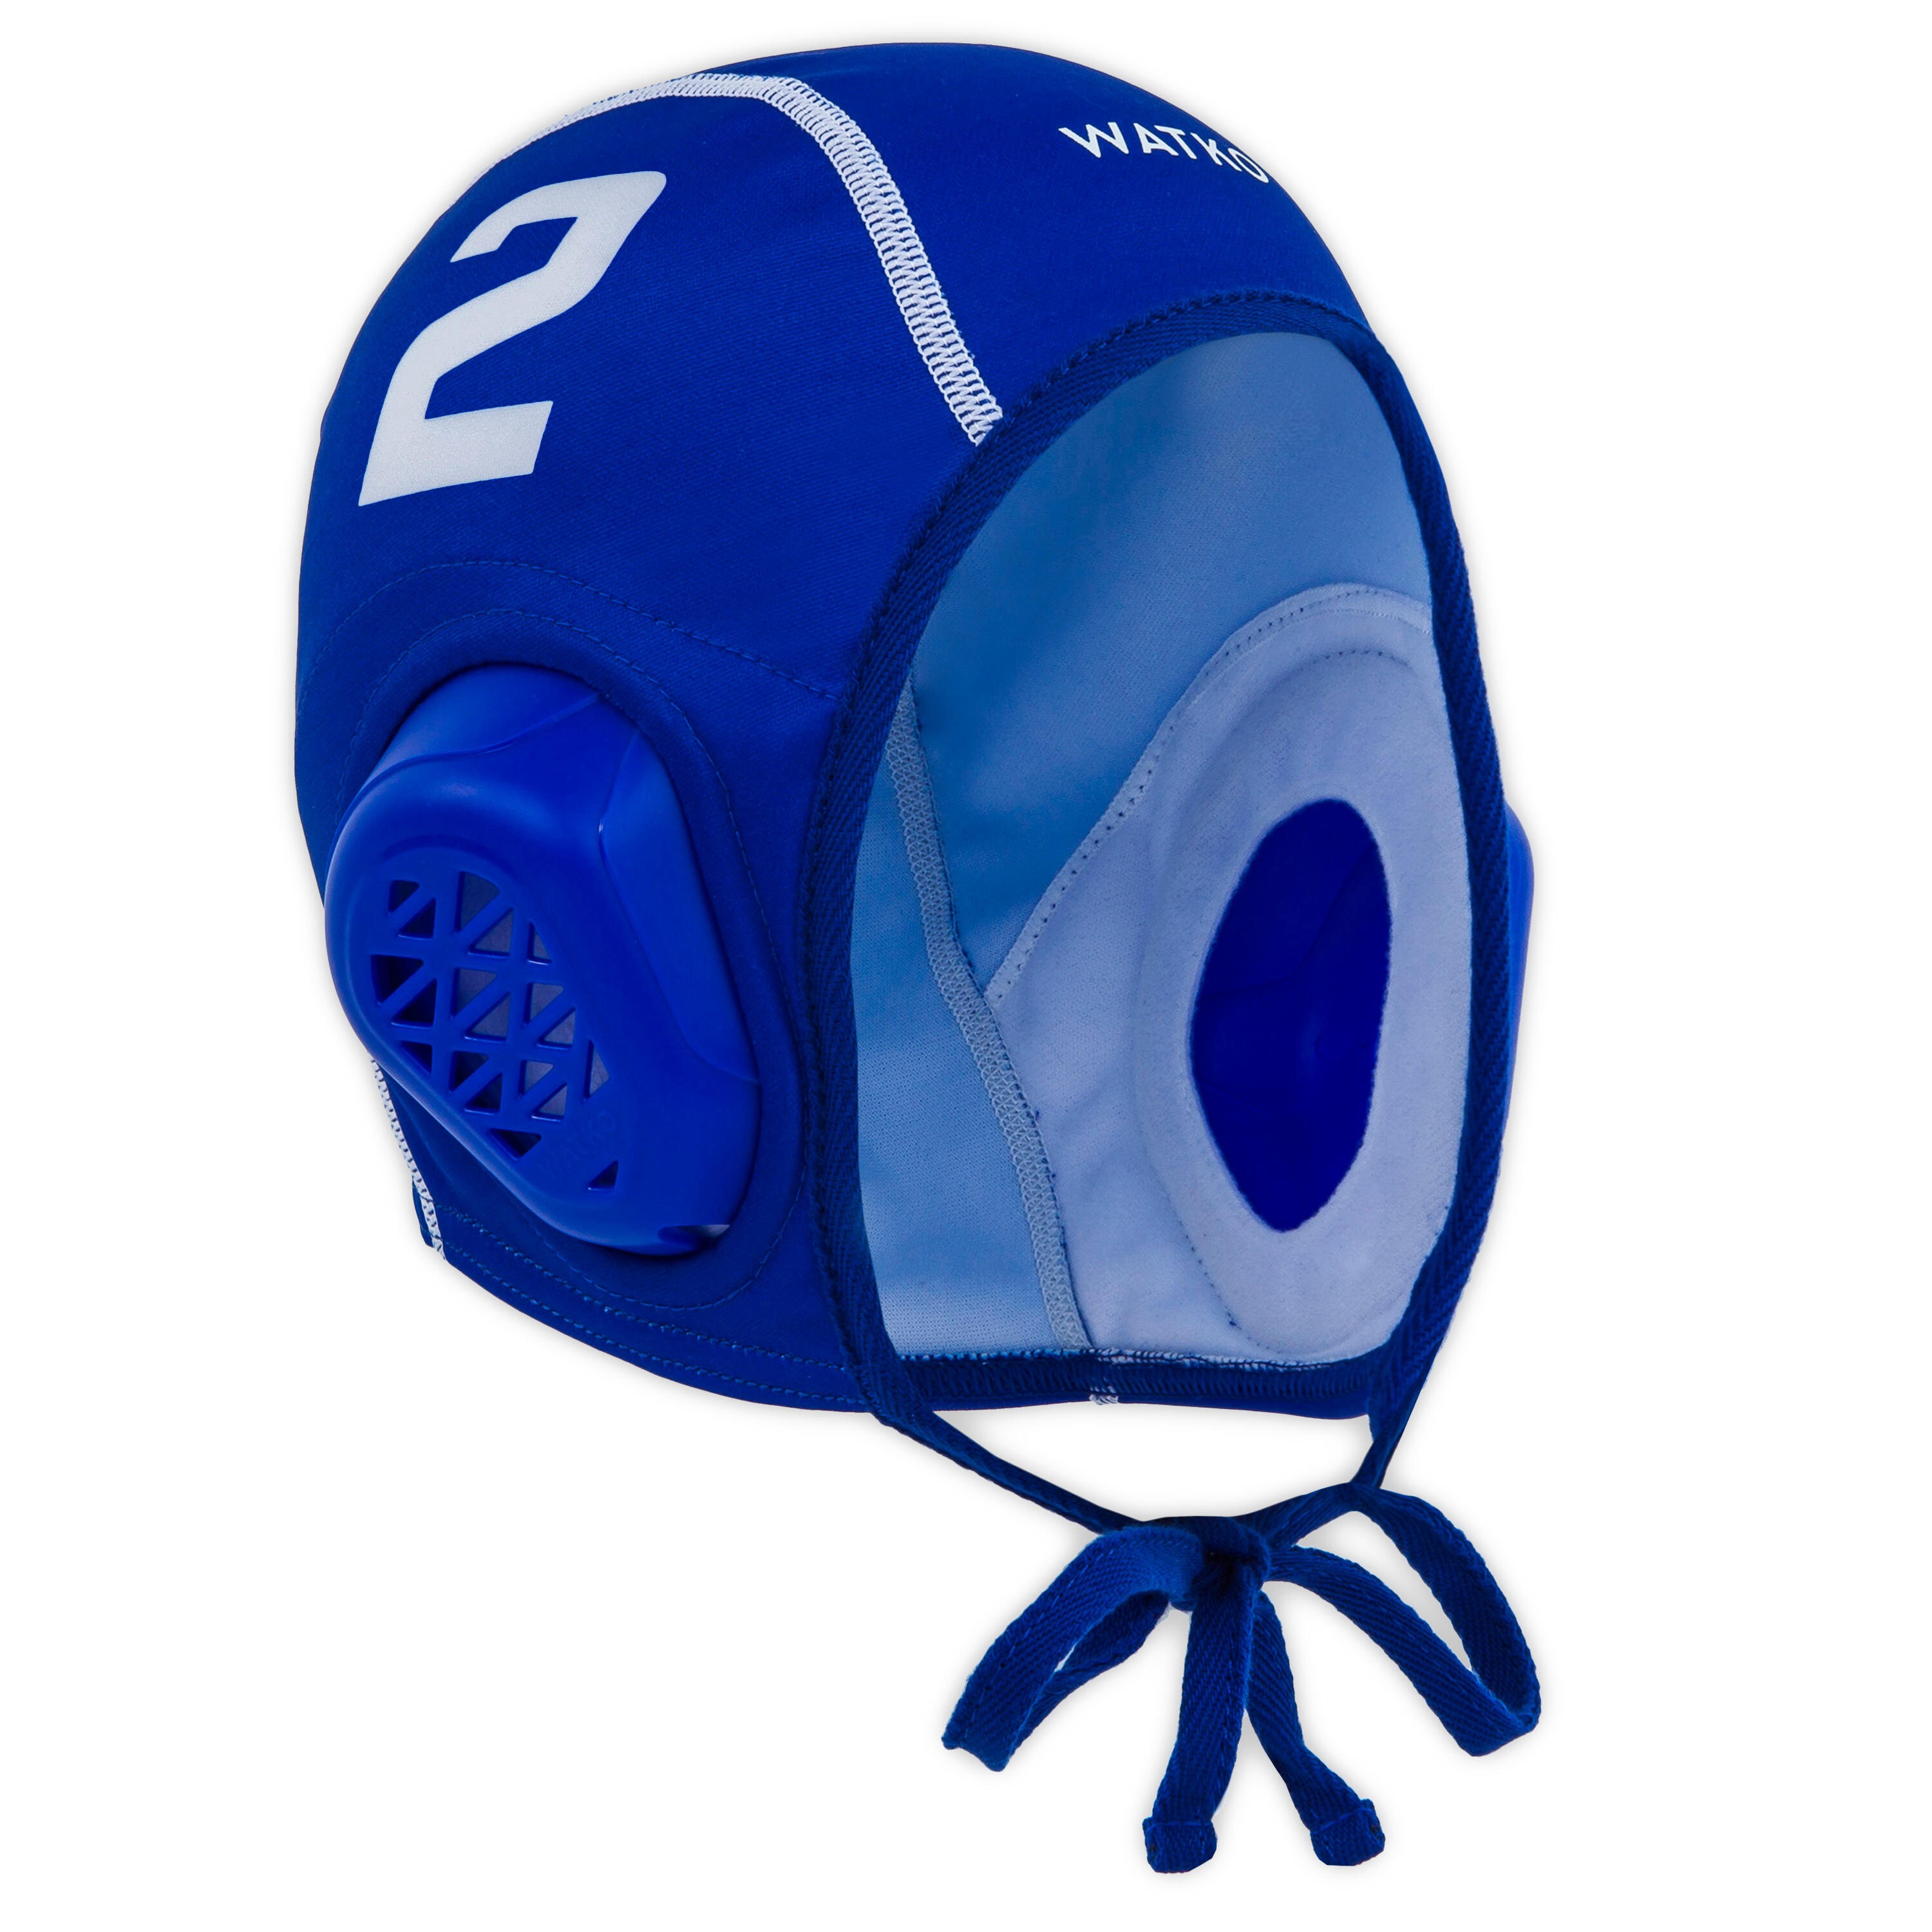 ADULT’S WATER POLO CAPS 900 SET OF 13 - BLUE 2/7